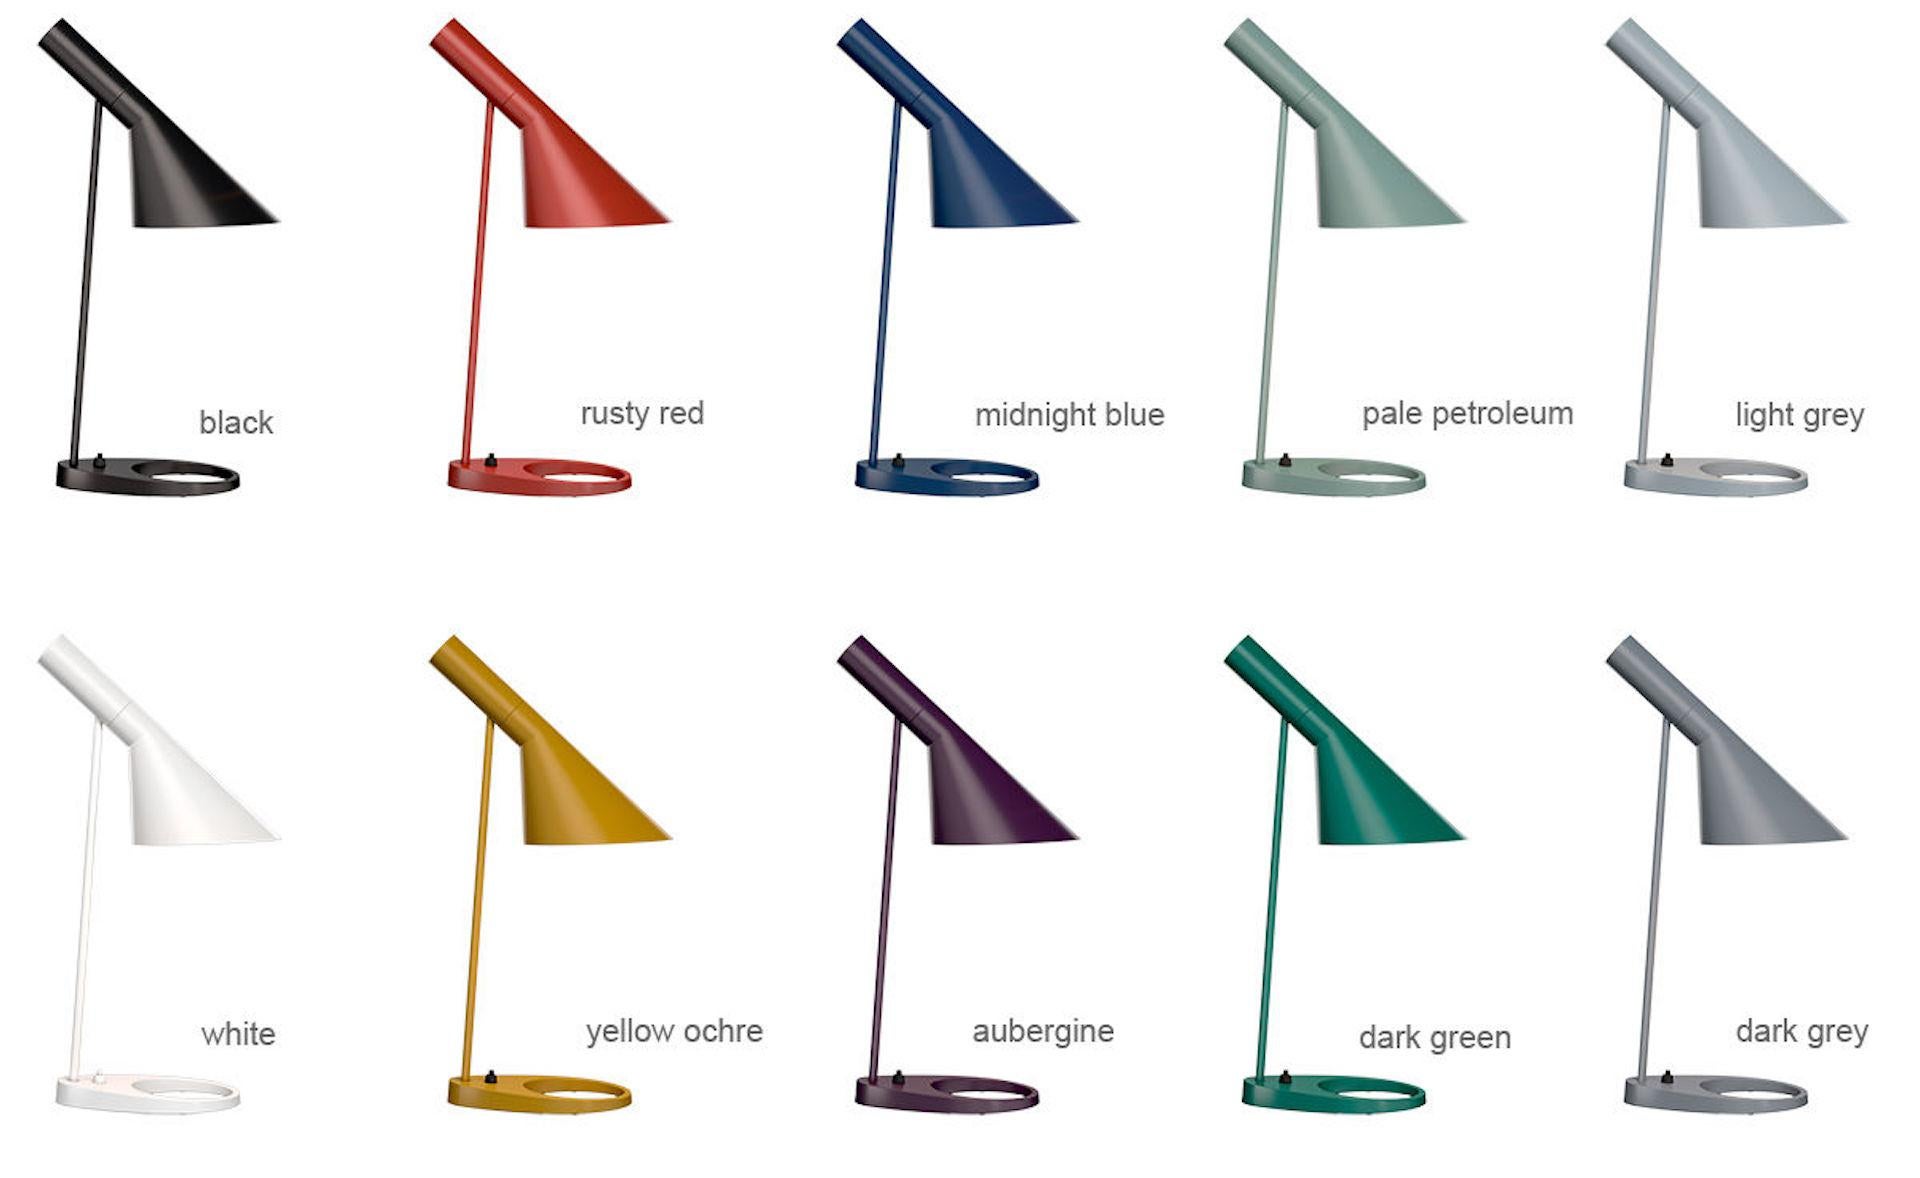 AJ floor lamp by Arne Jacobsen. Current production by Louis Poulsen. Comes in midnight blue, aubergine, dark green, pale petroleum, rusty red, sand, yellow ochre, black, dark grey, light grey or white. The fixture emits downward directed light. The